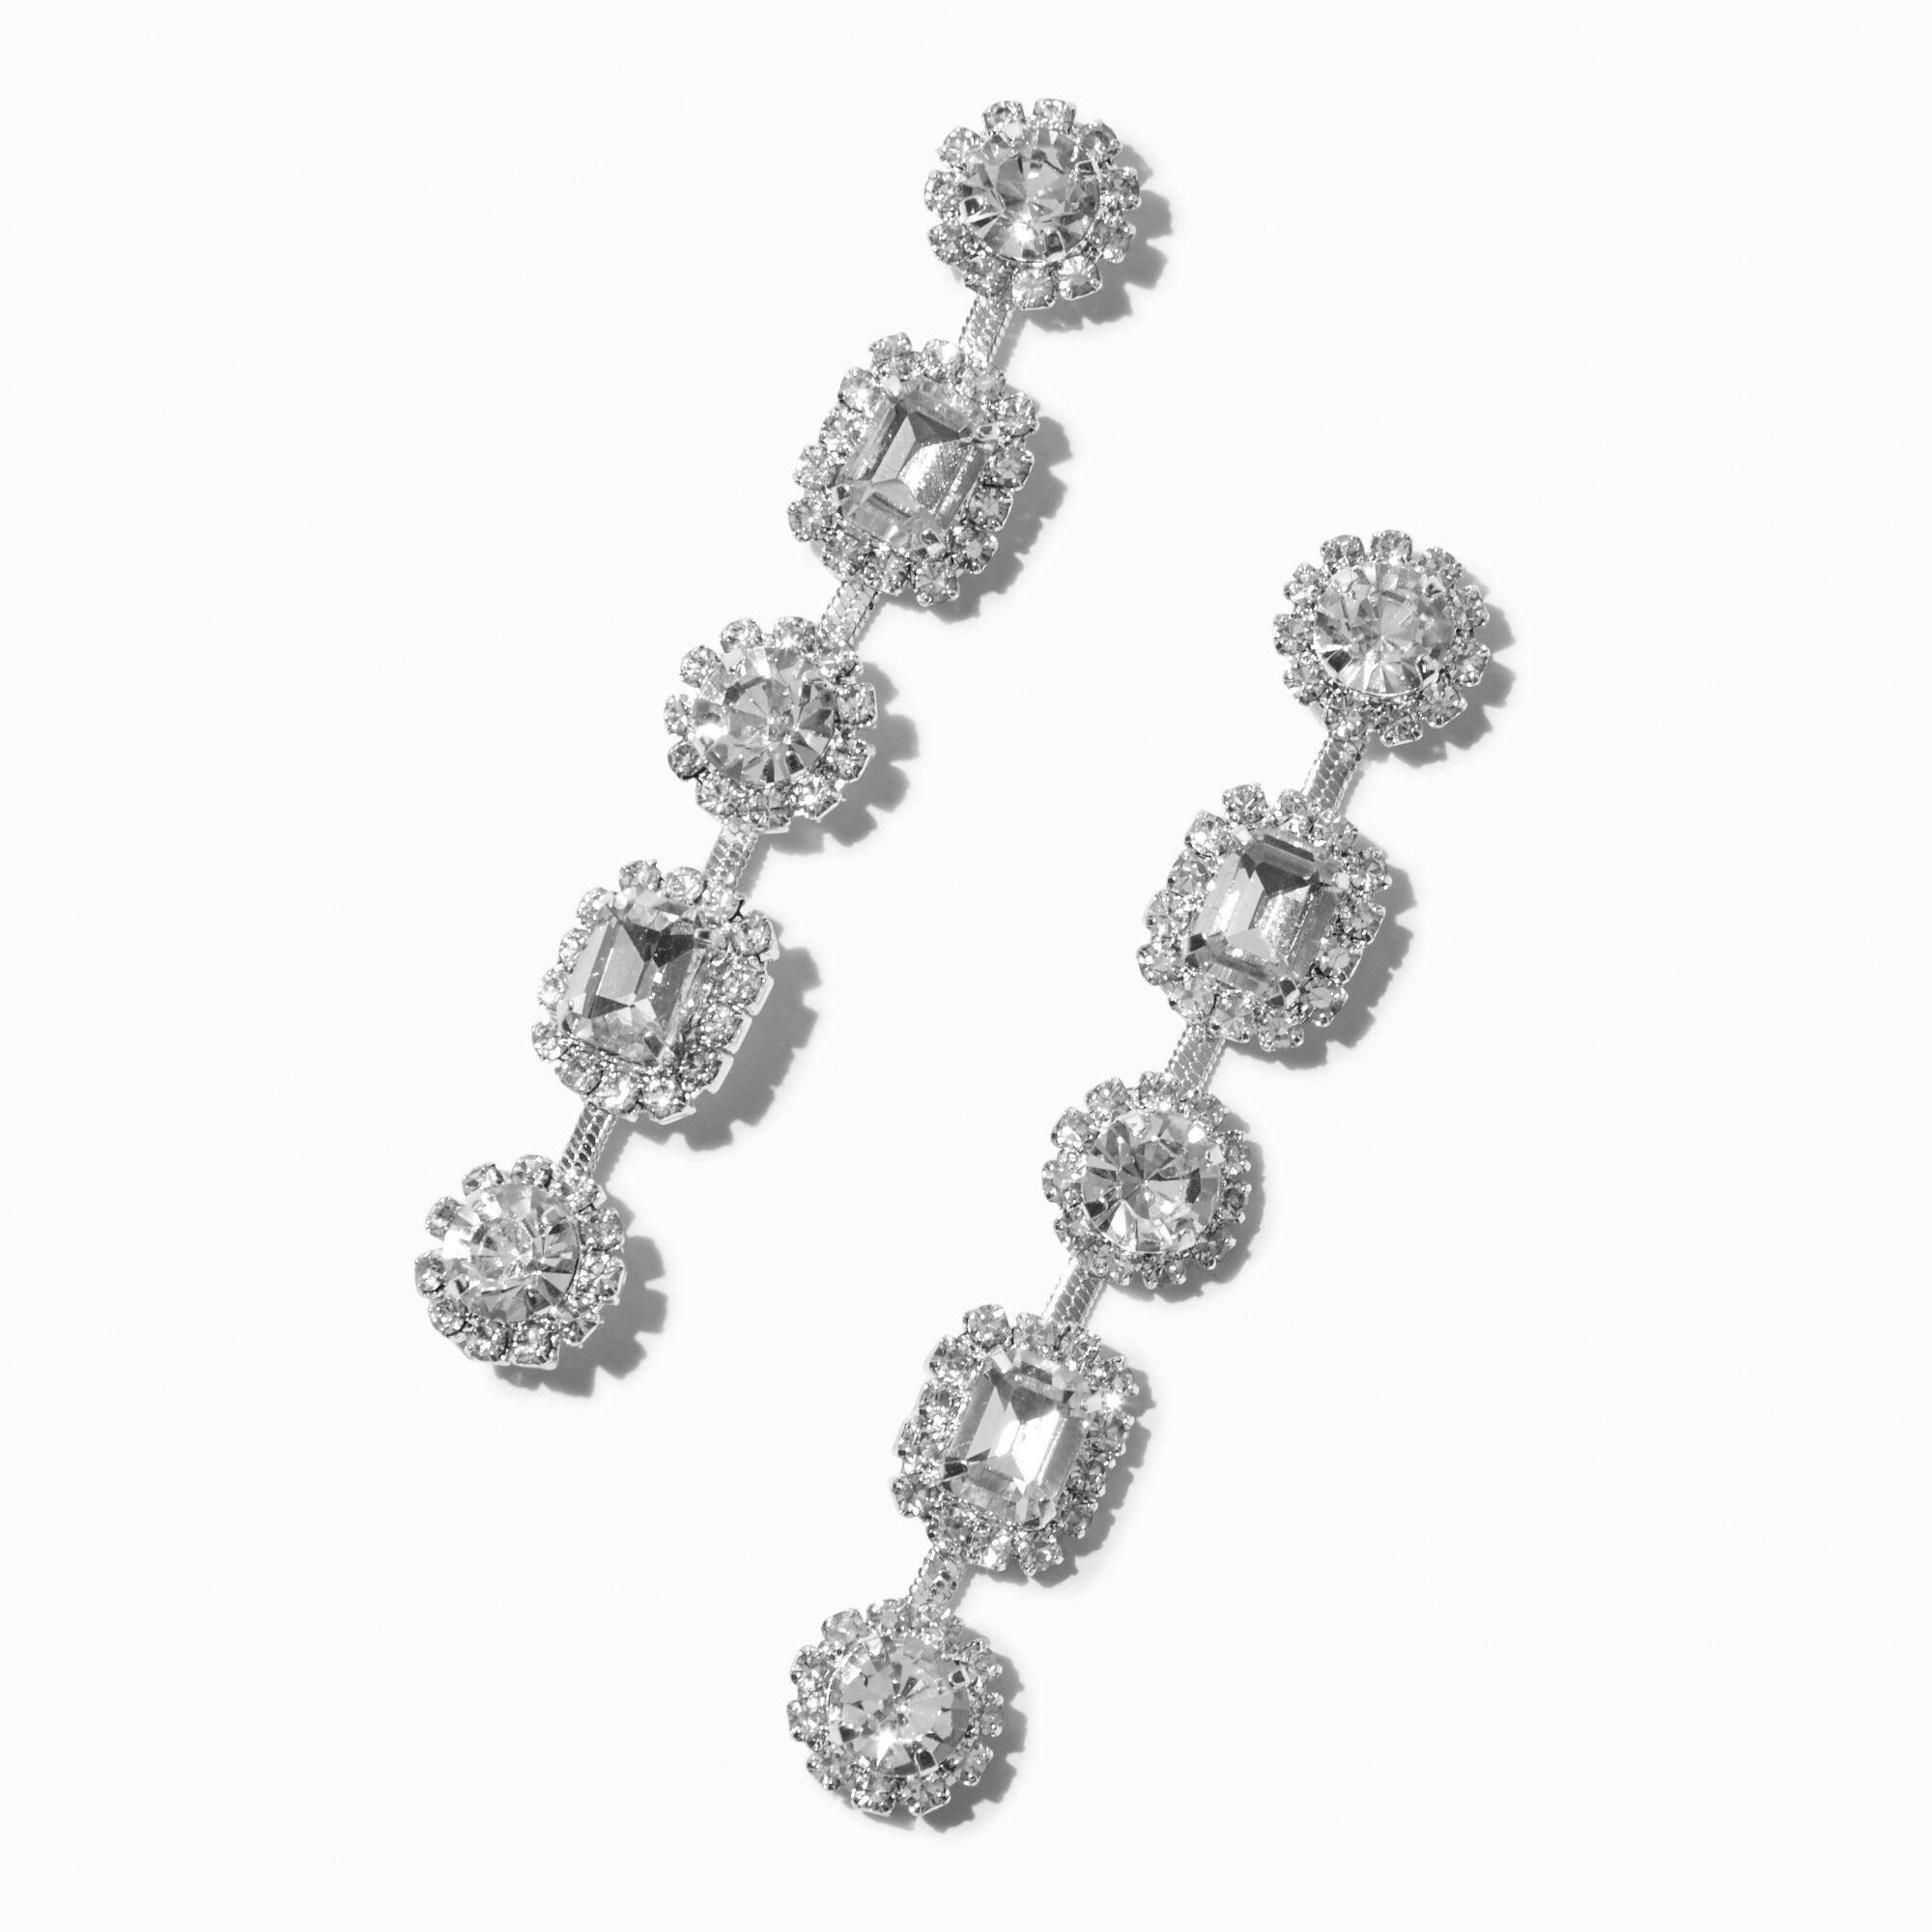 View Claires Tone Rhinestone Snake Chain 3 Linear Drop Earrings Silver information